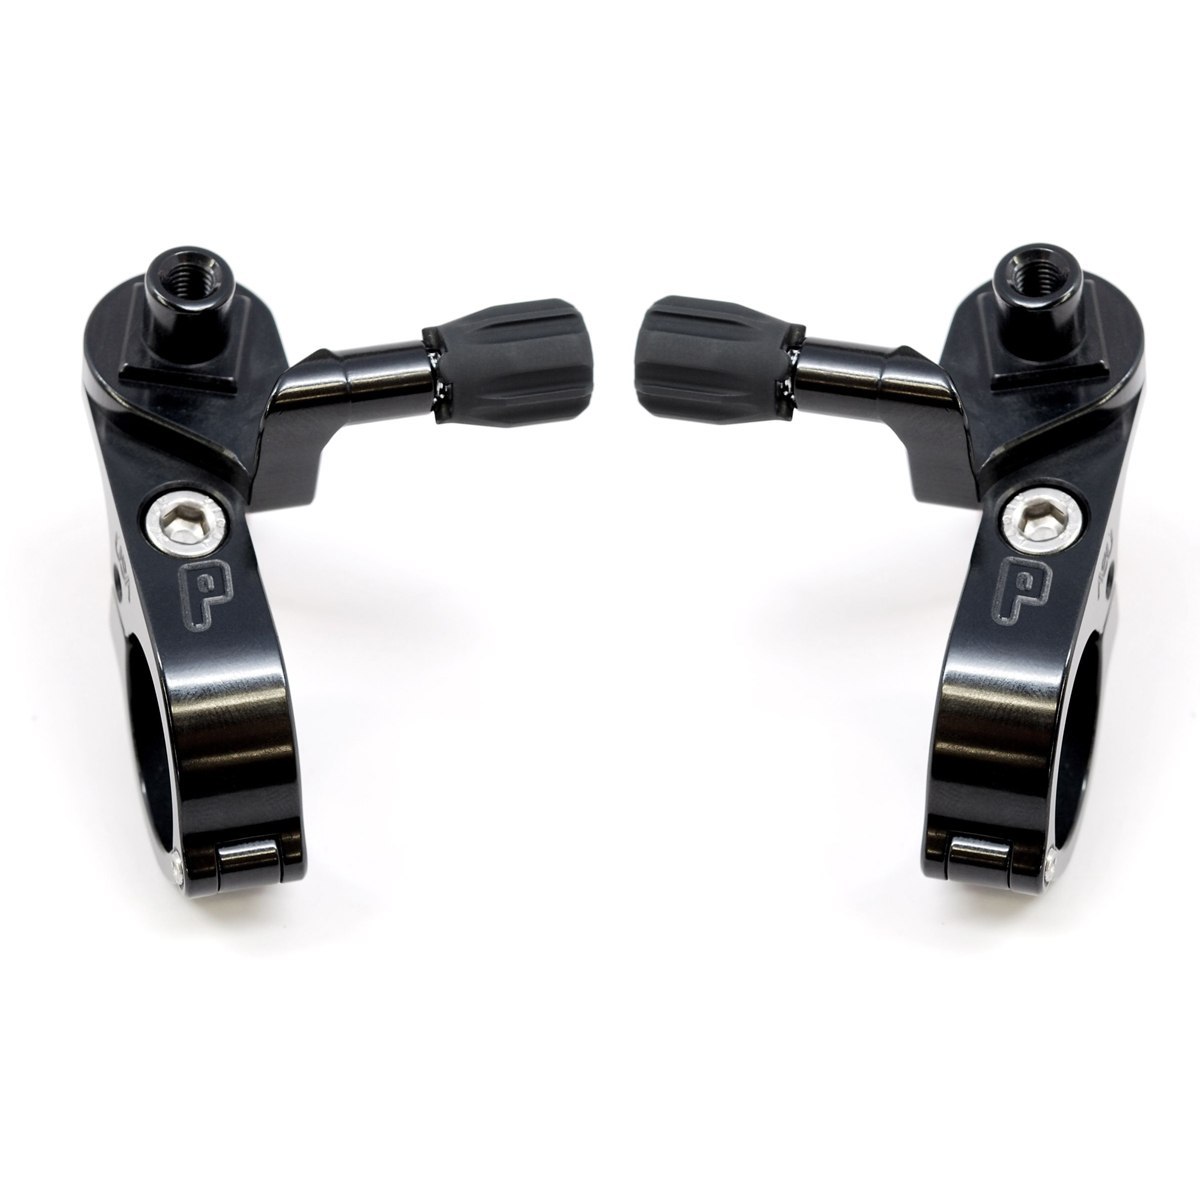 Picture of Paul Component Thumbie Microshift Thumb Shifter Adapter - Pair - black